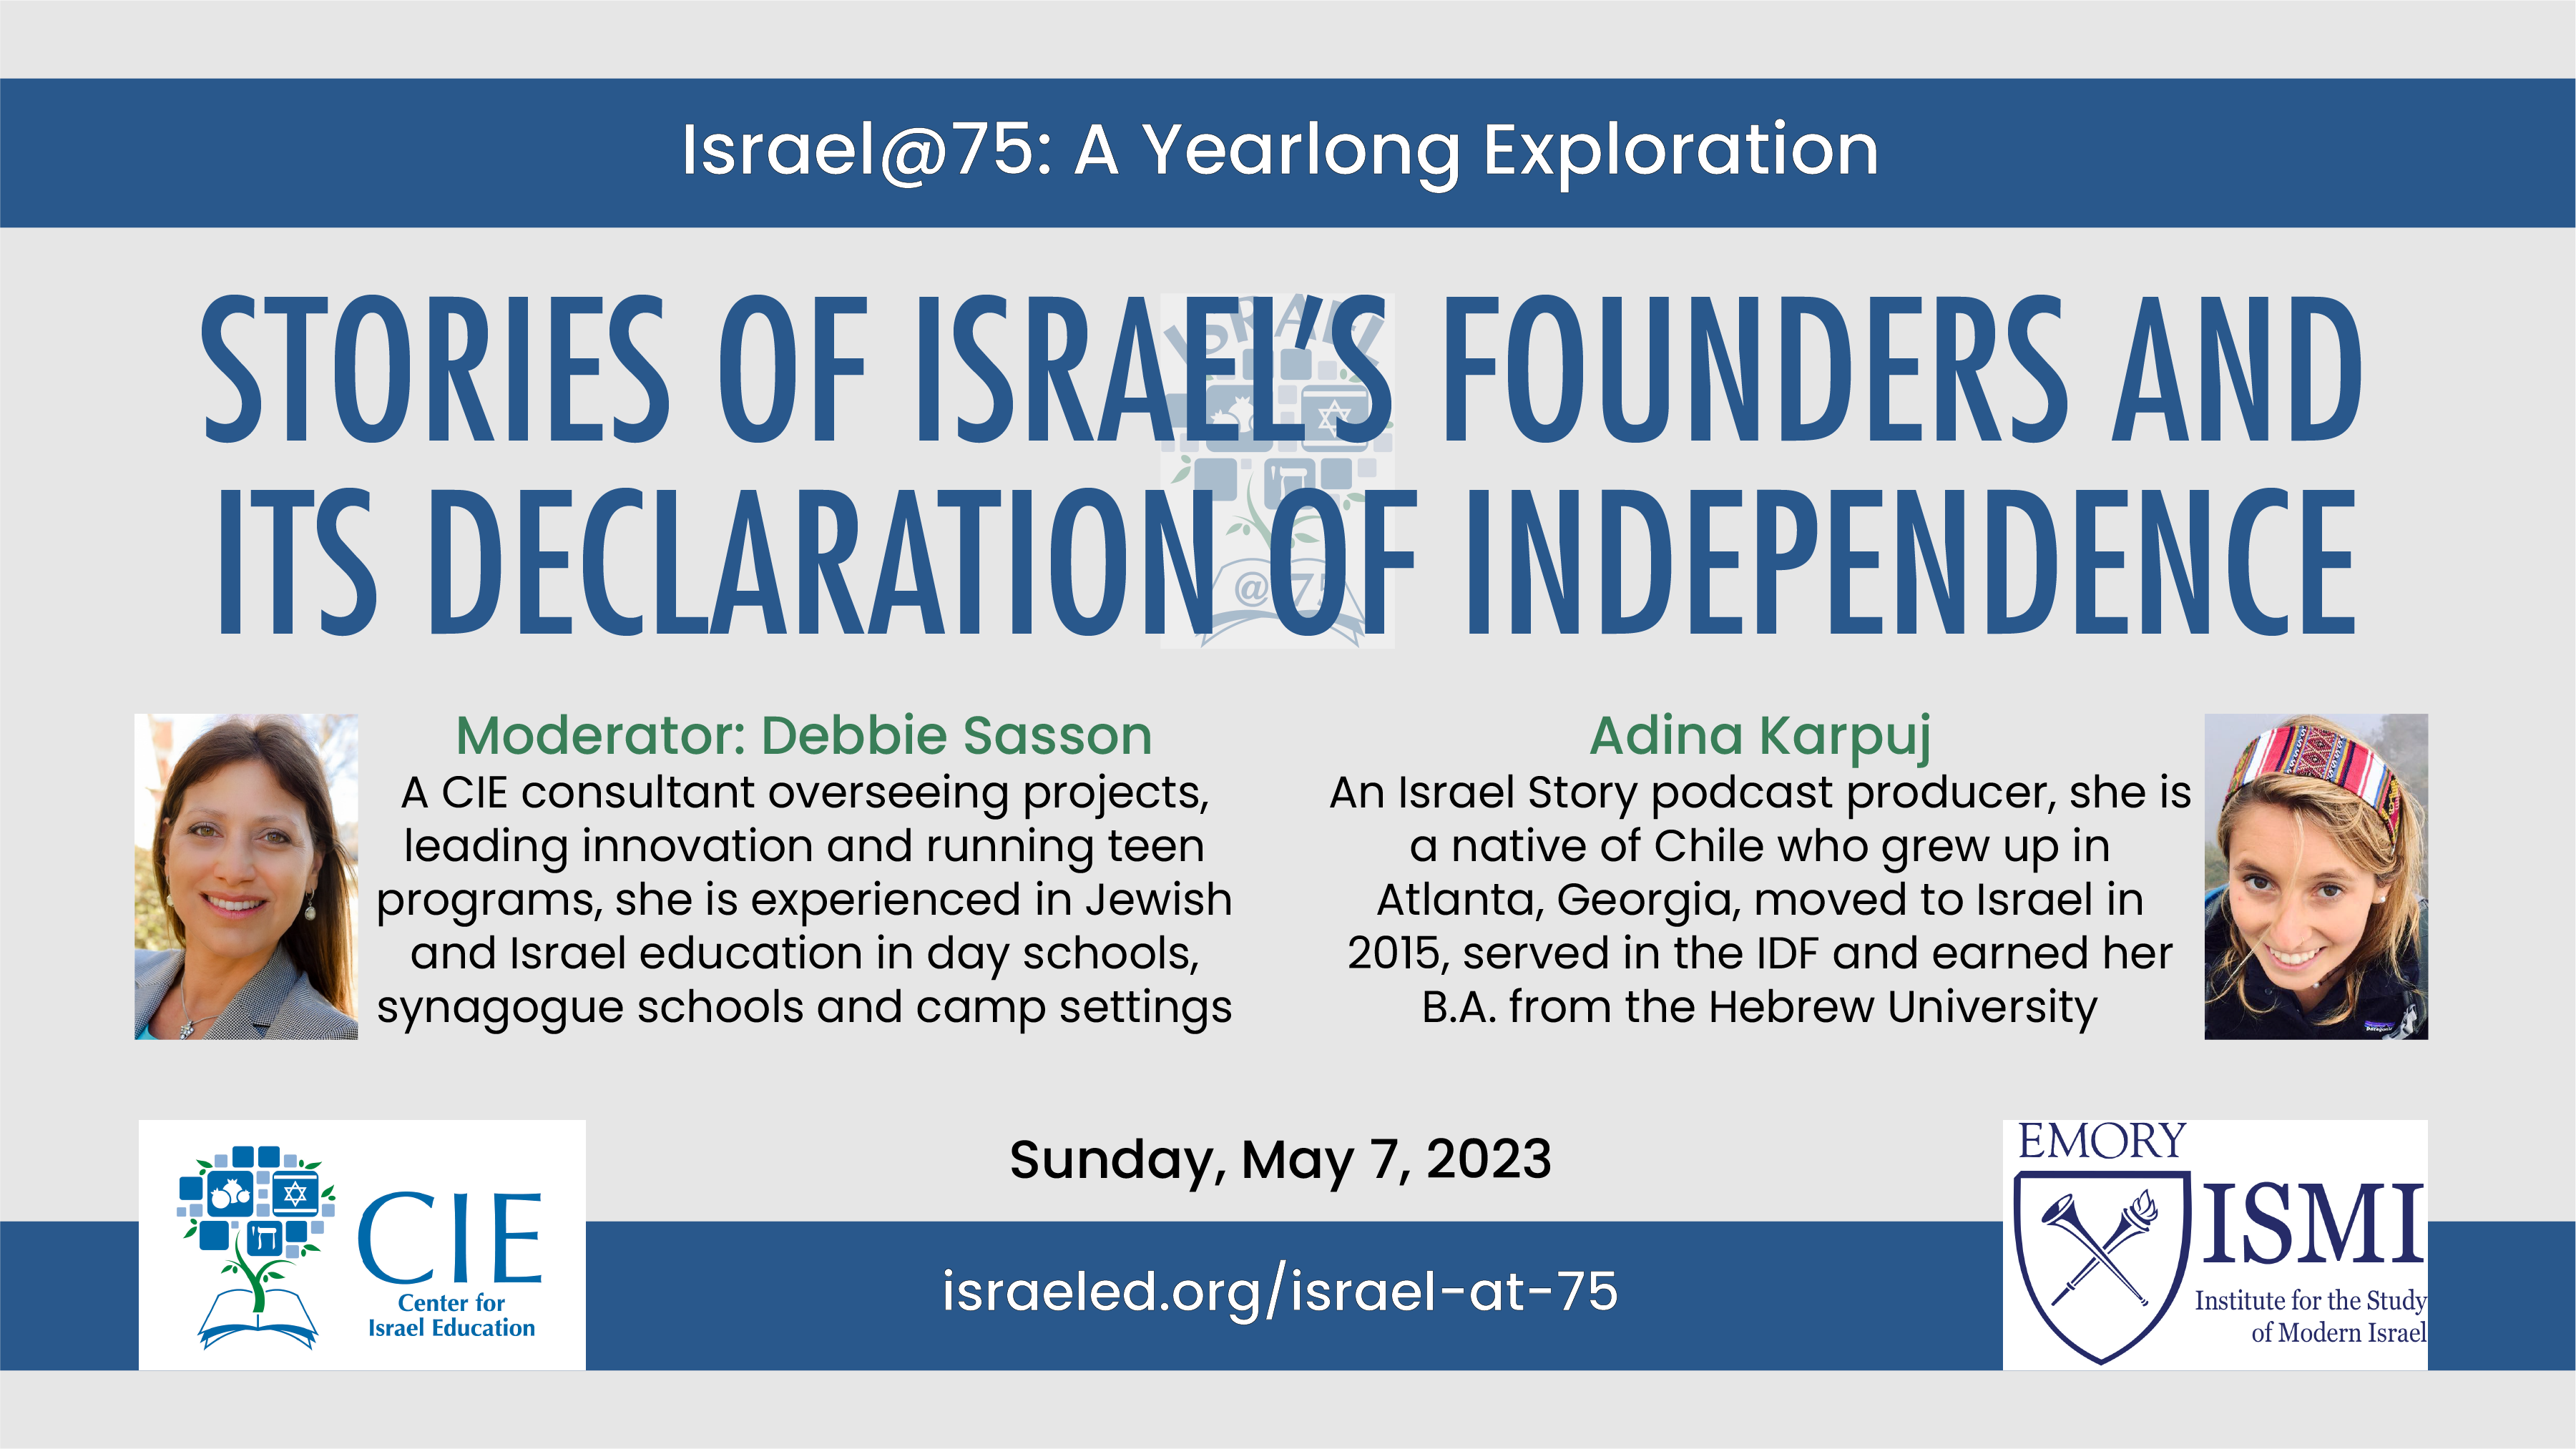 Stories of Israel’s Founders and the Declaration of Independence